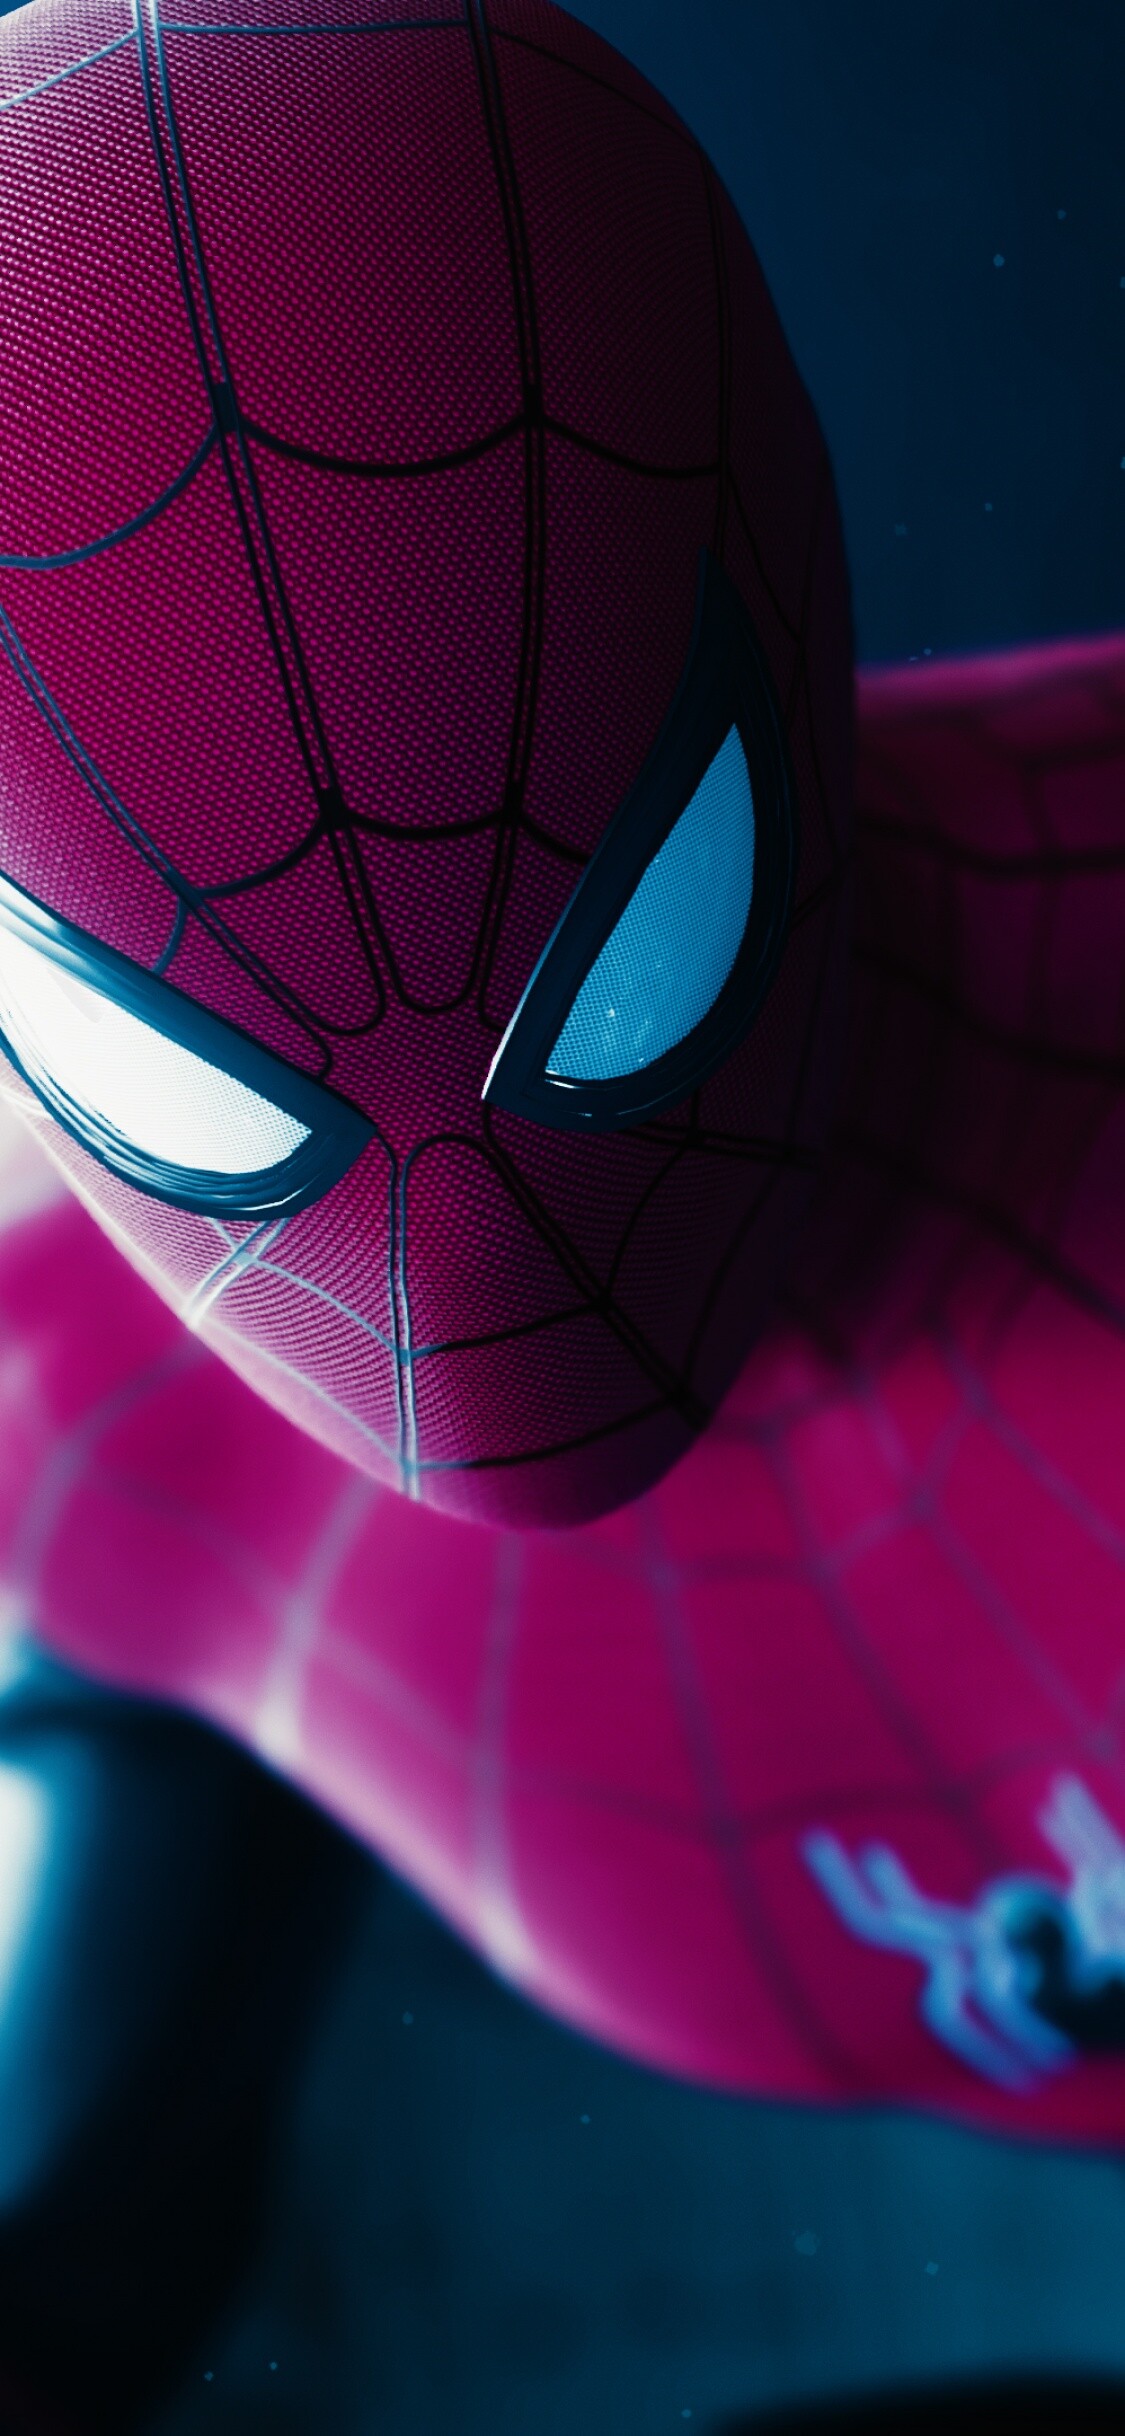 Marvel Heroes: Spider-Man, Peter Parker, Spider-like abilities. 1130x2440 HD Wallpaper.